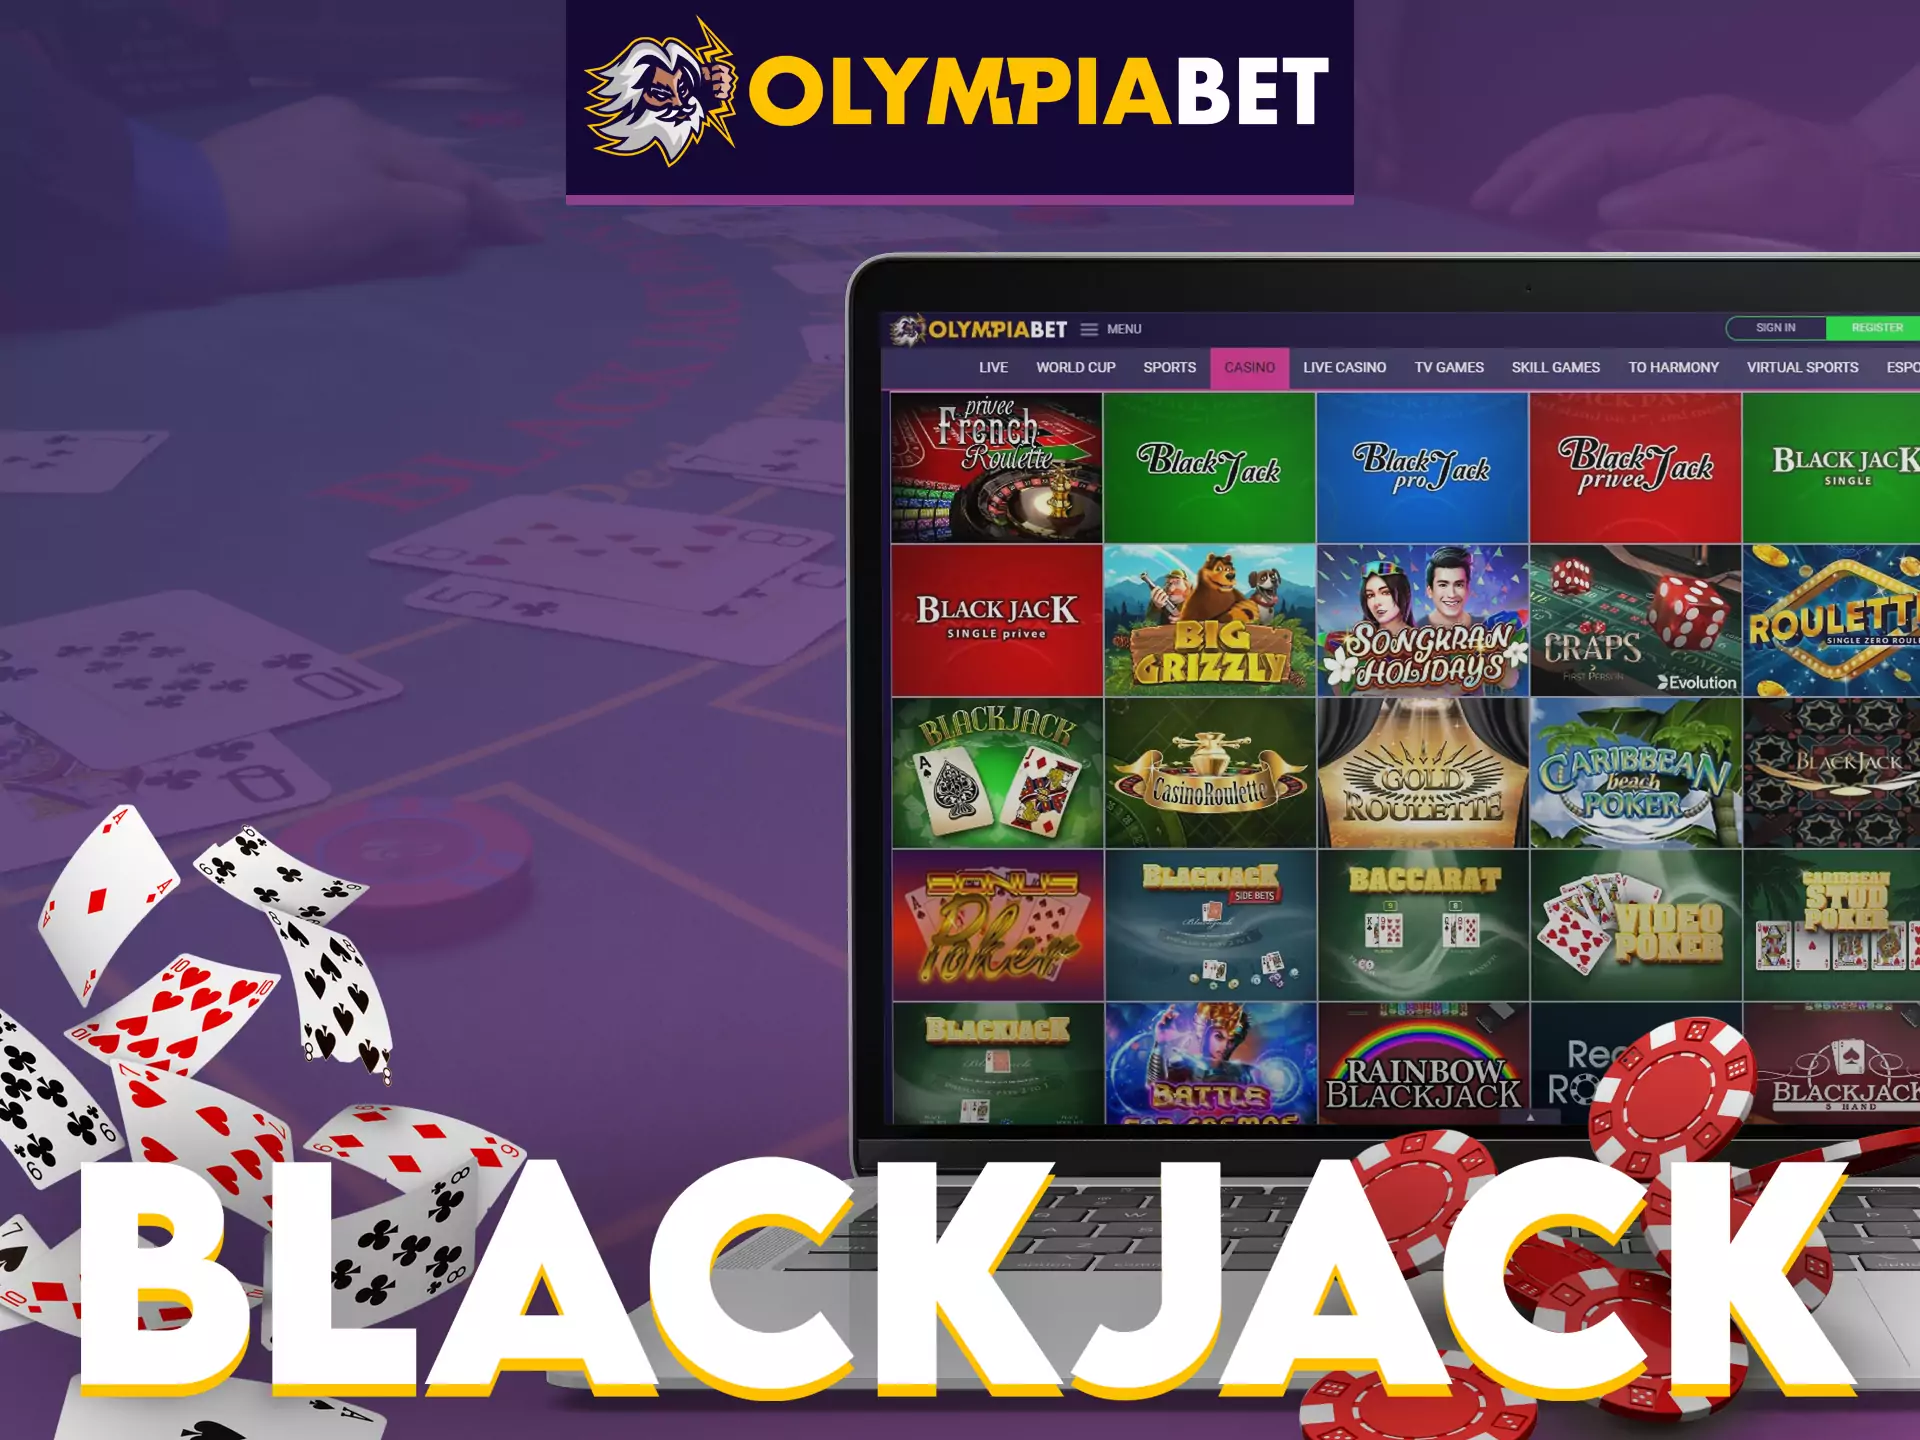 Show off your blackjack skills at OlympiaBet Casino.